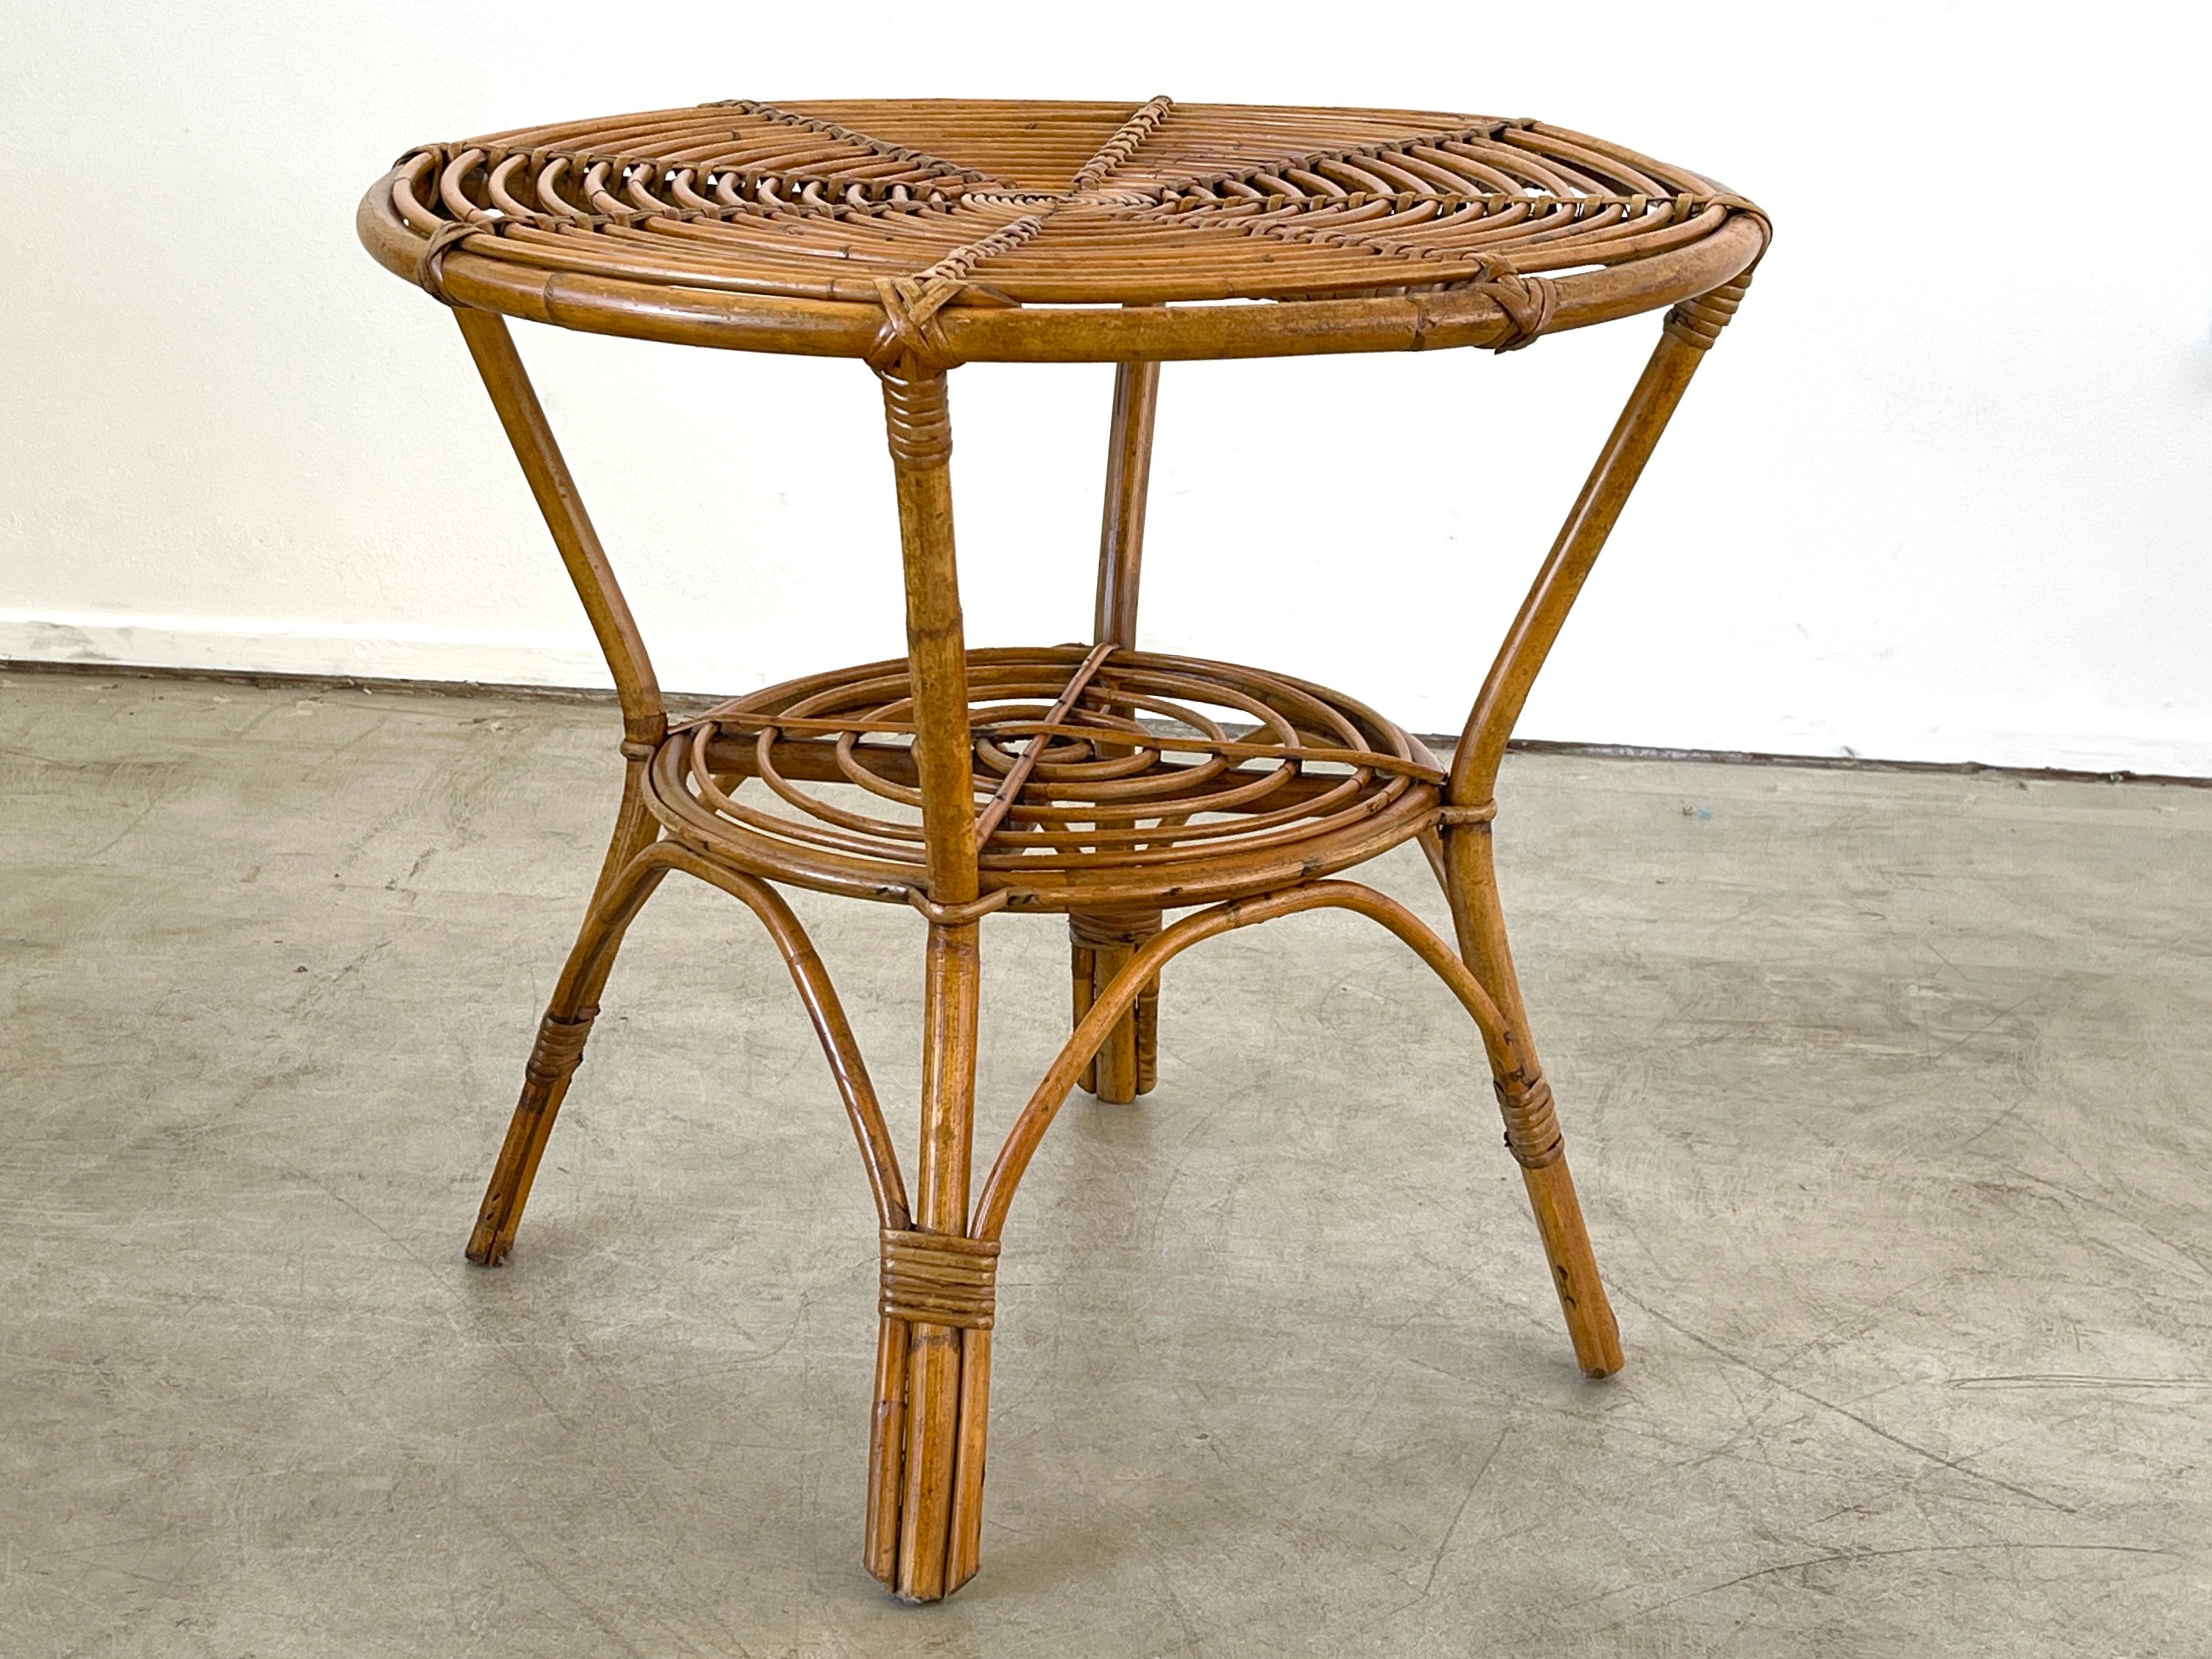 Italian bamboo rattan side table with 2 tiers - could be used as side table or coffee table.